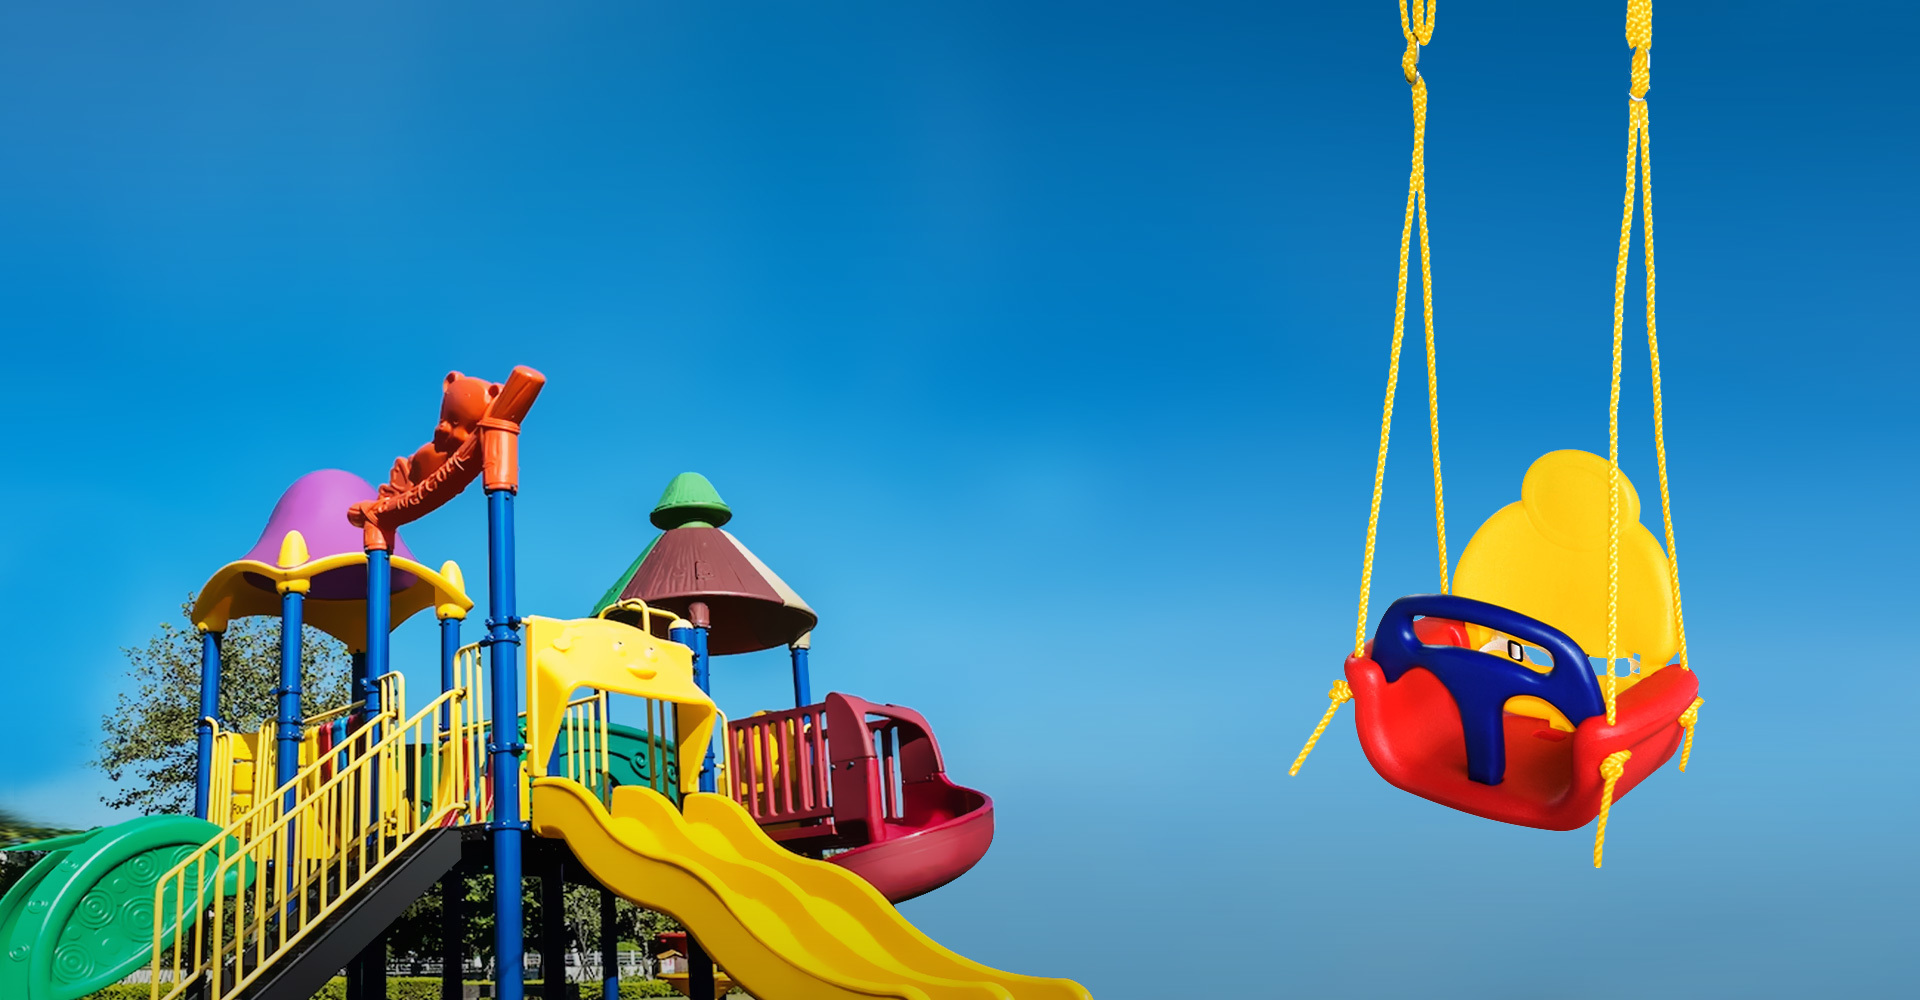 Our products are mainly plastic swing sets wood swing sets